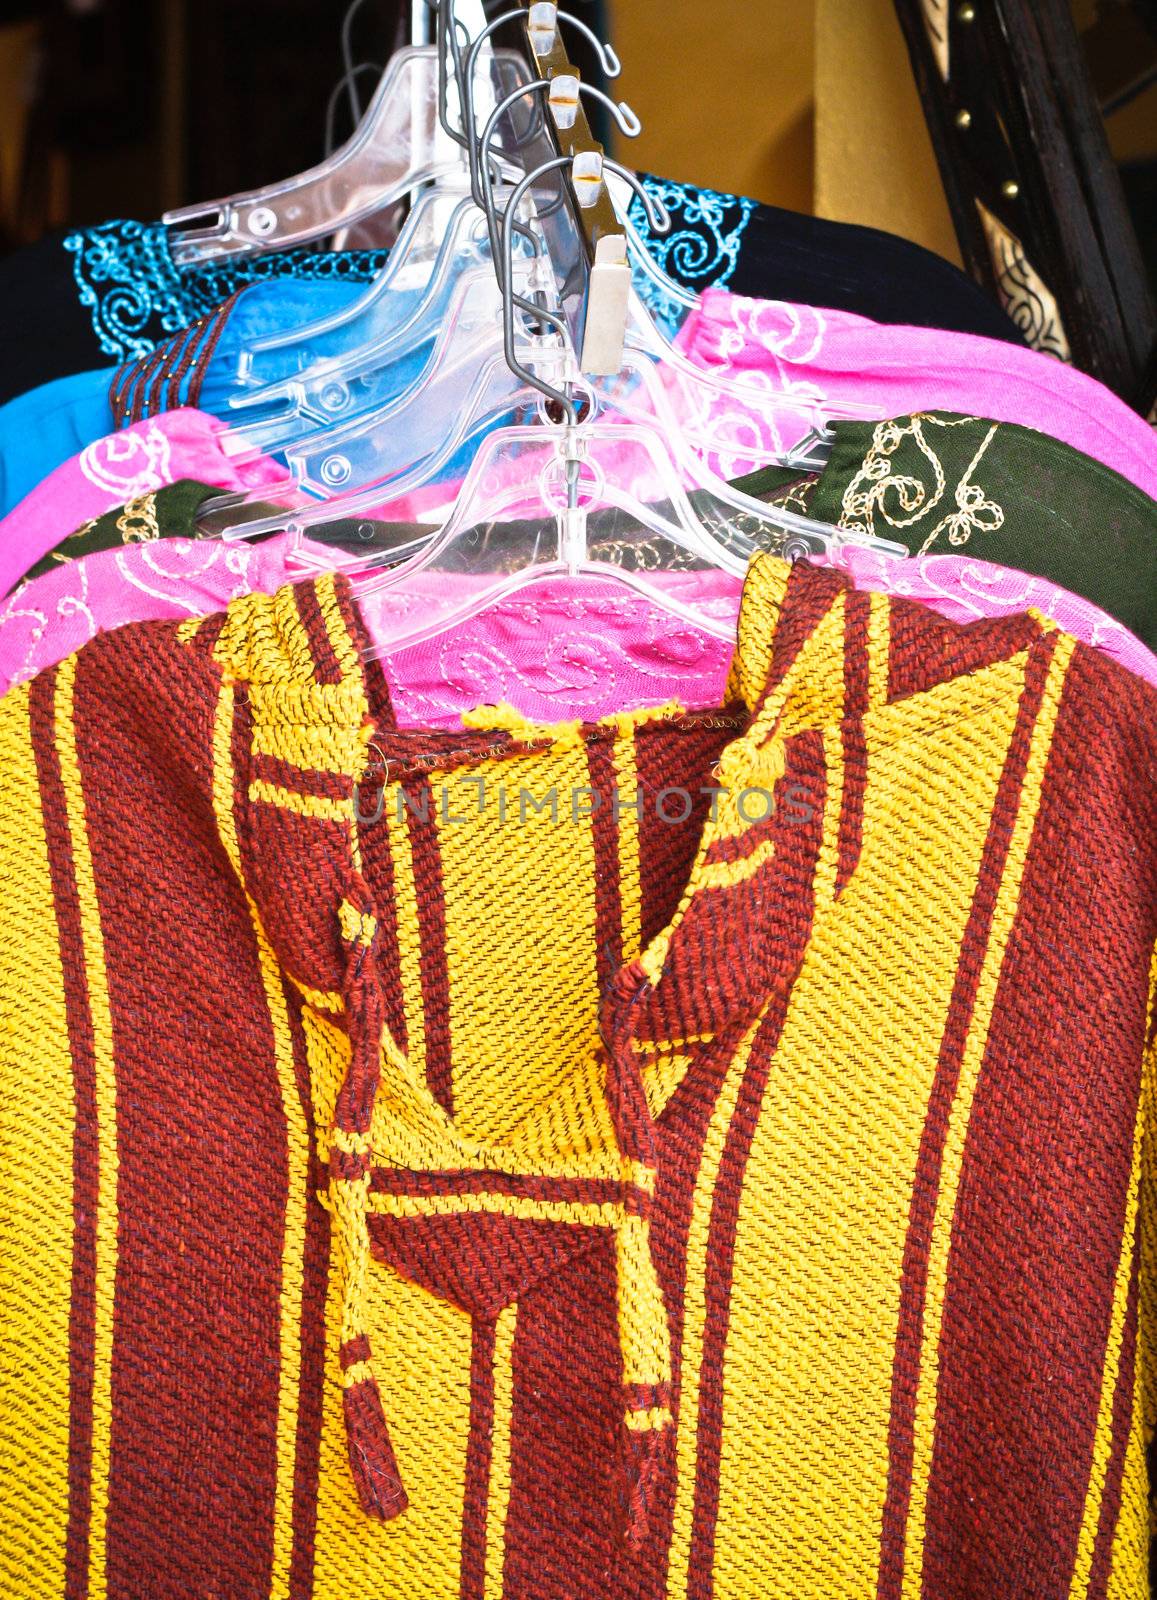 Traditional moroccan clothes in a market stall